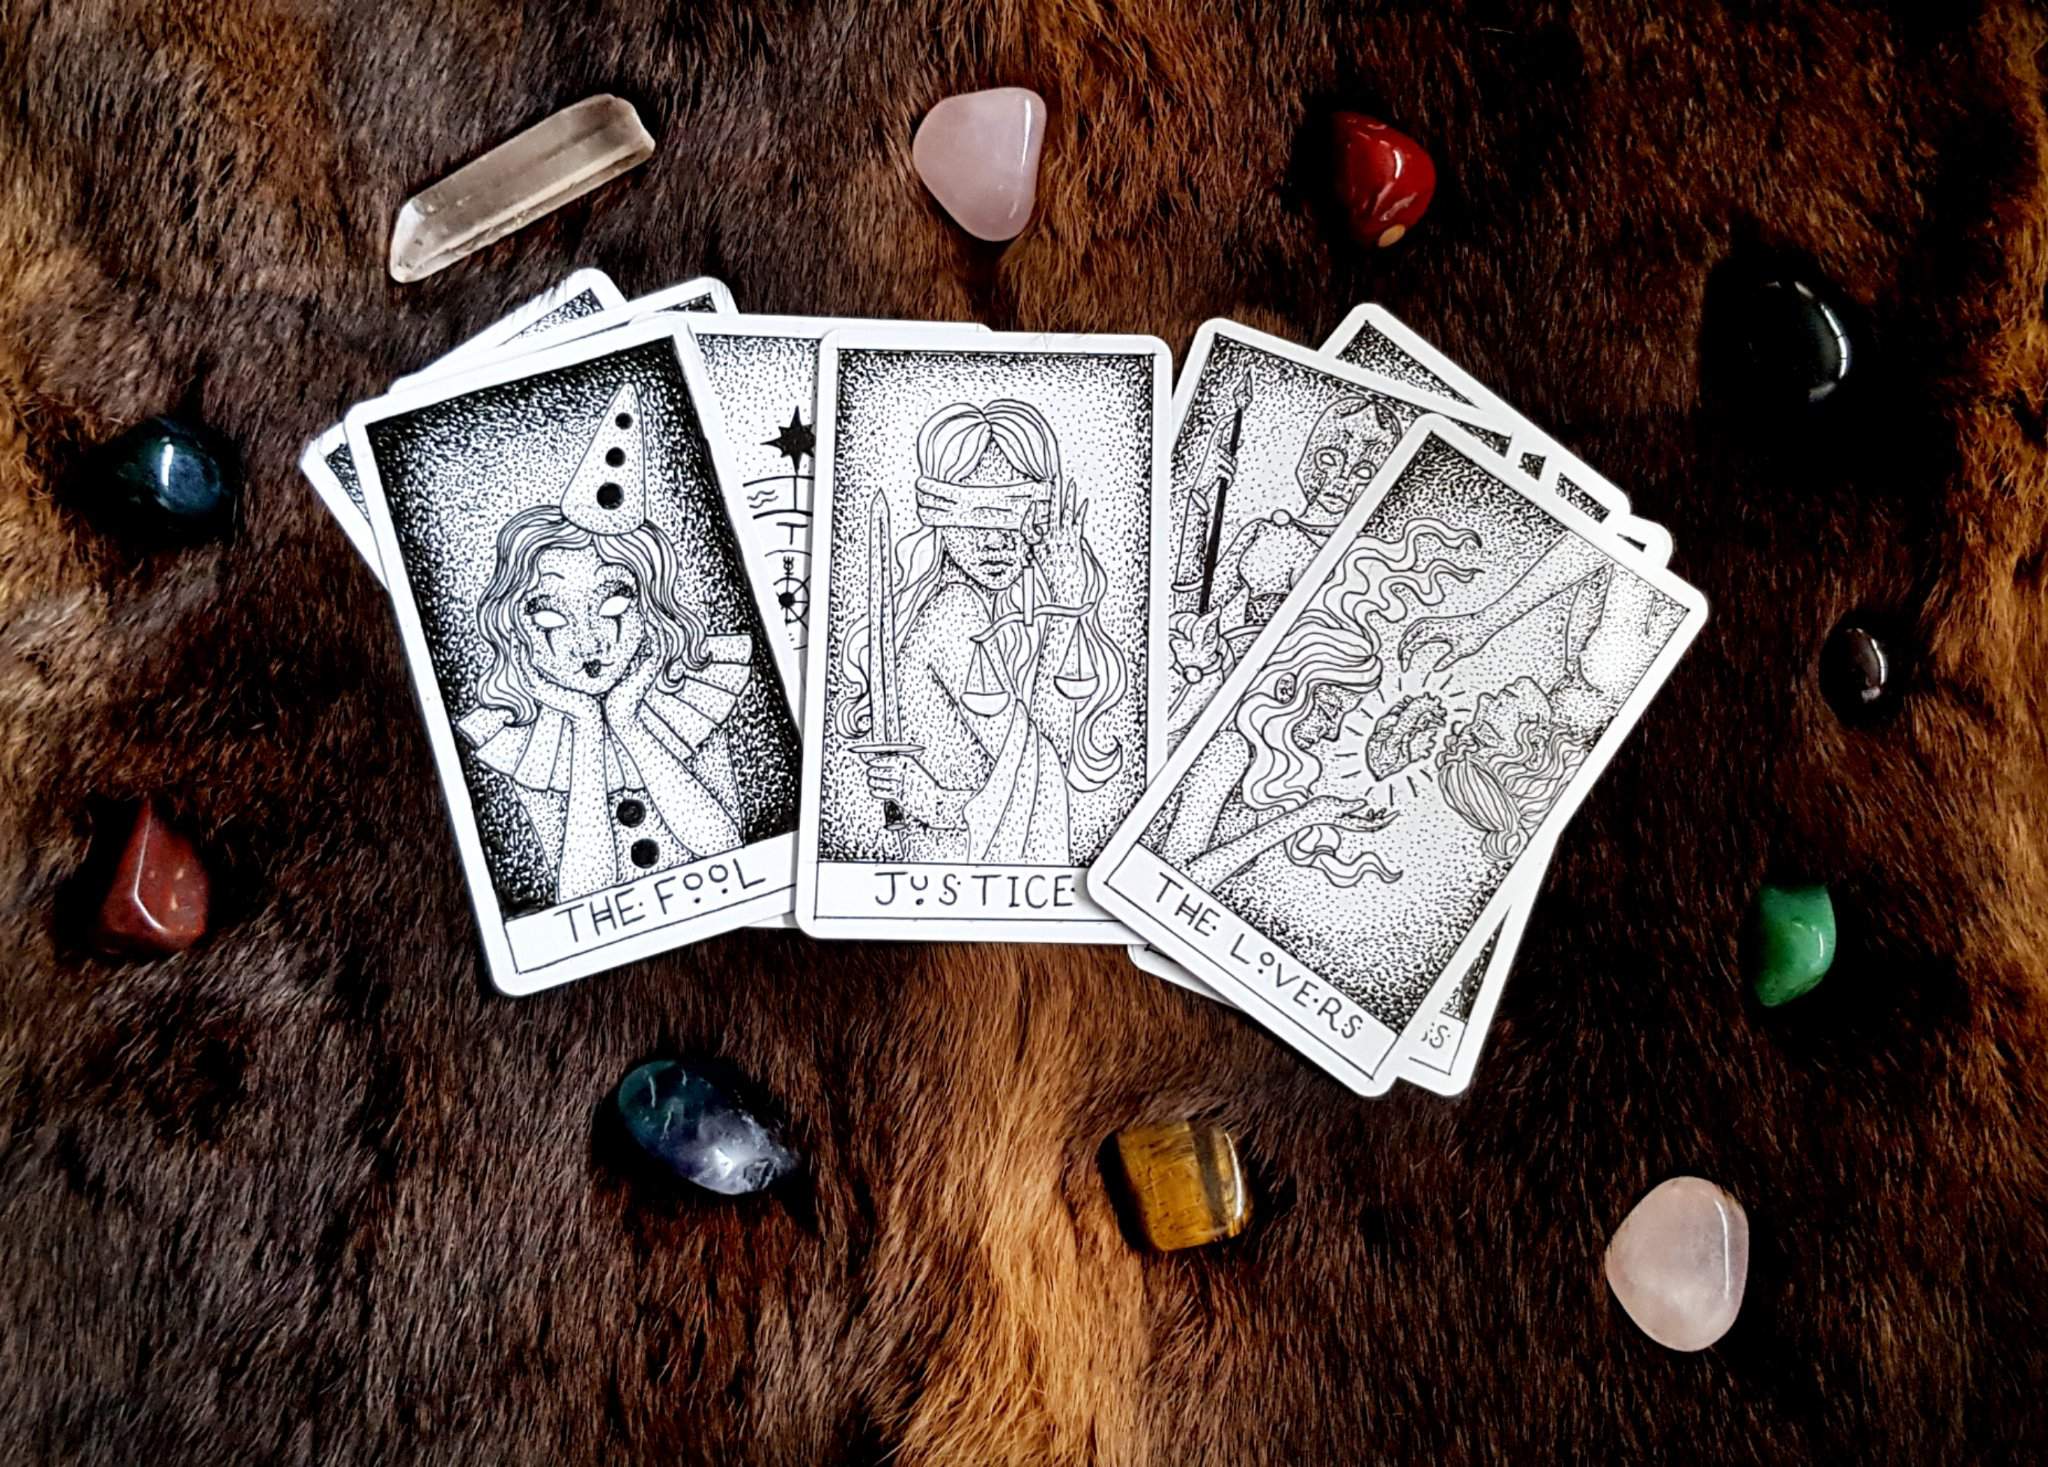 making-my-own-tarot-cards-owc-creativecrafting-pagans-witches-amino